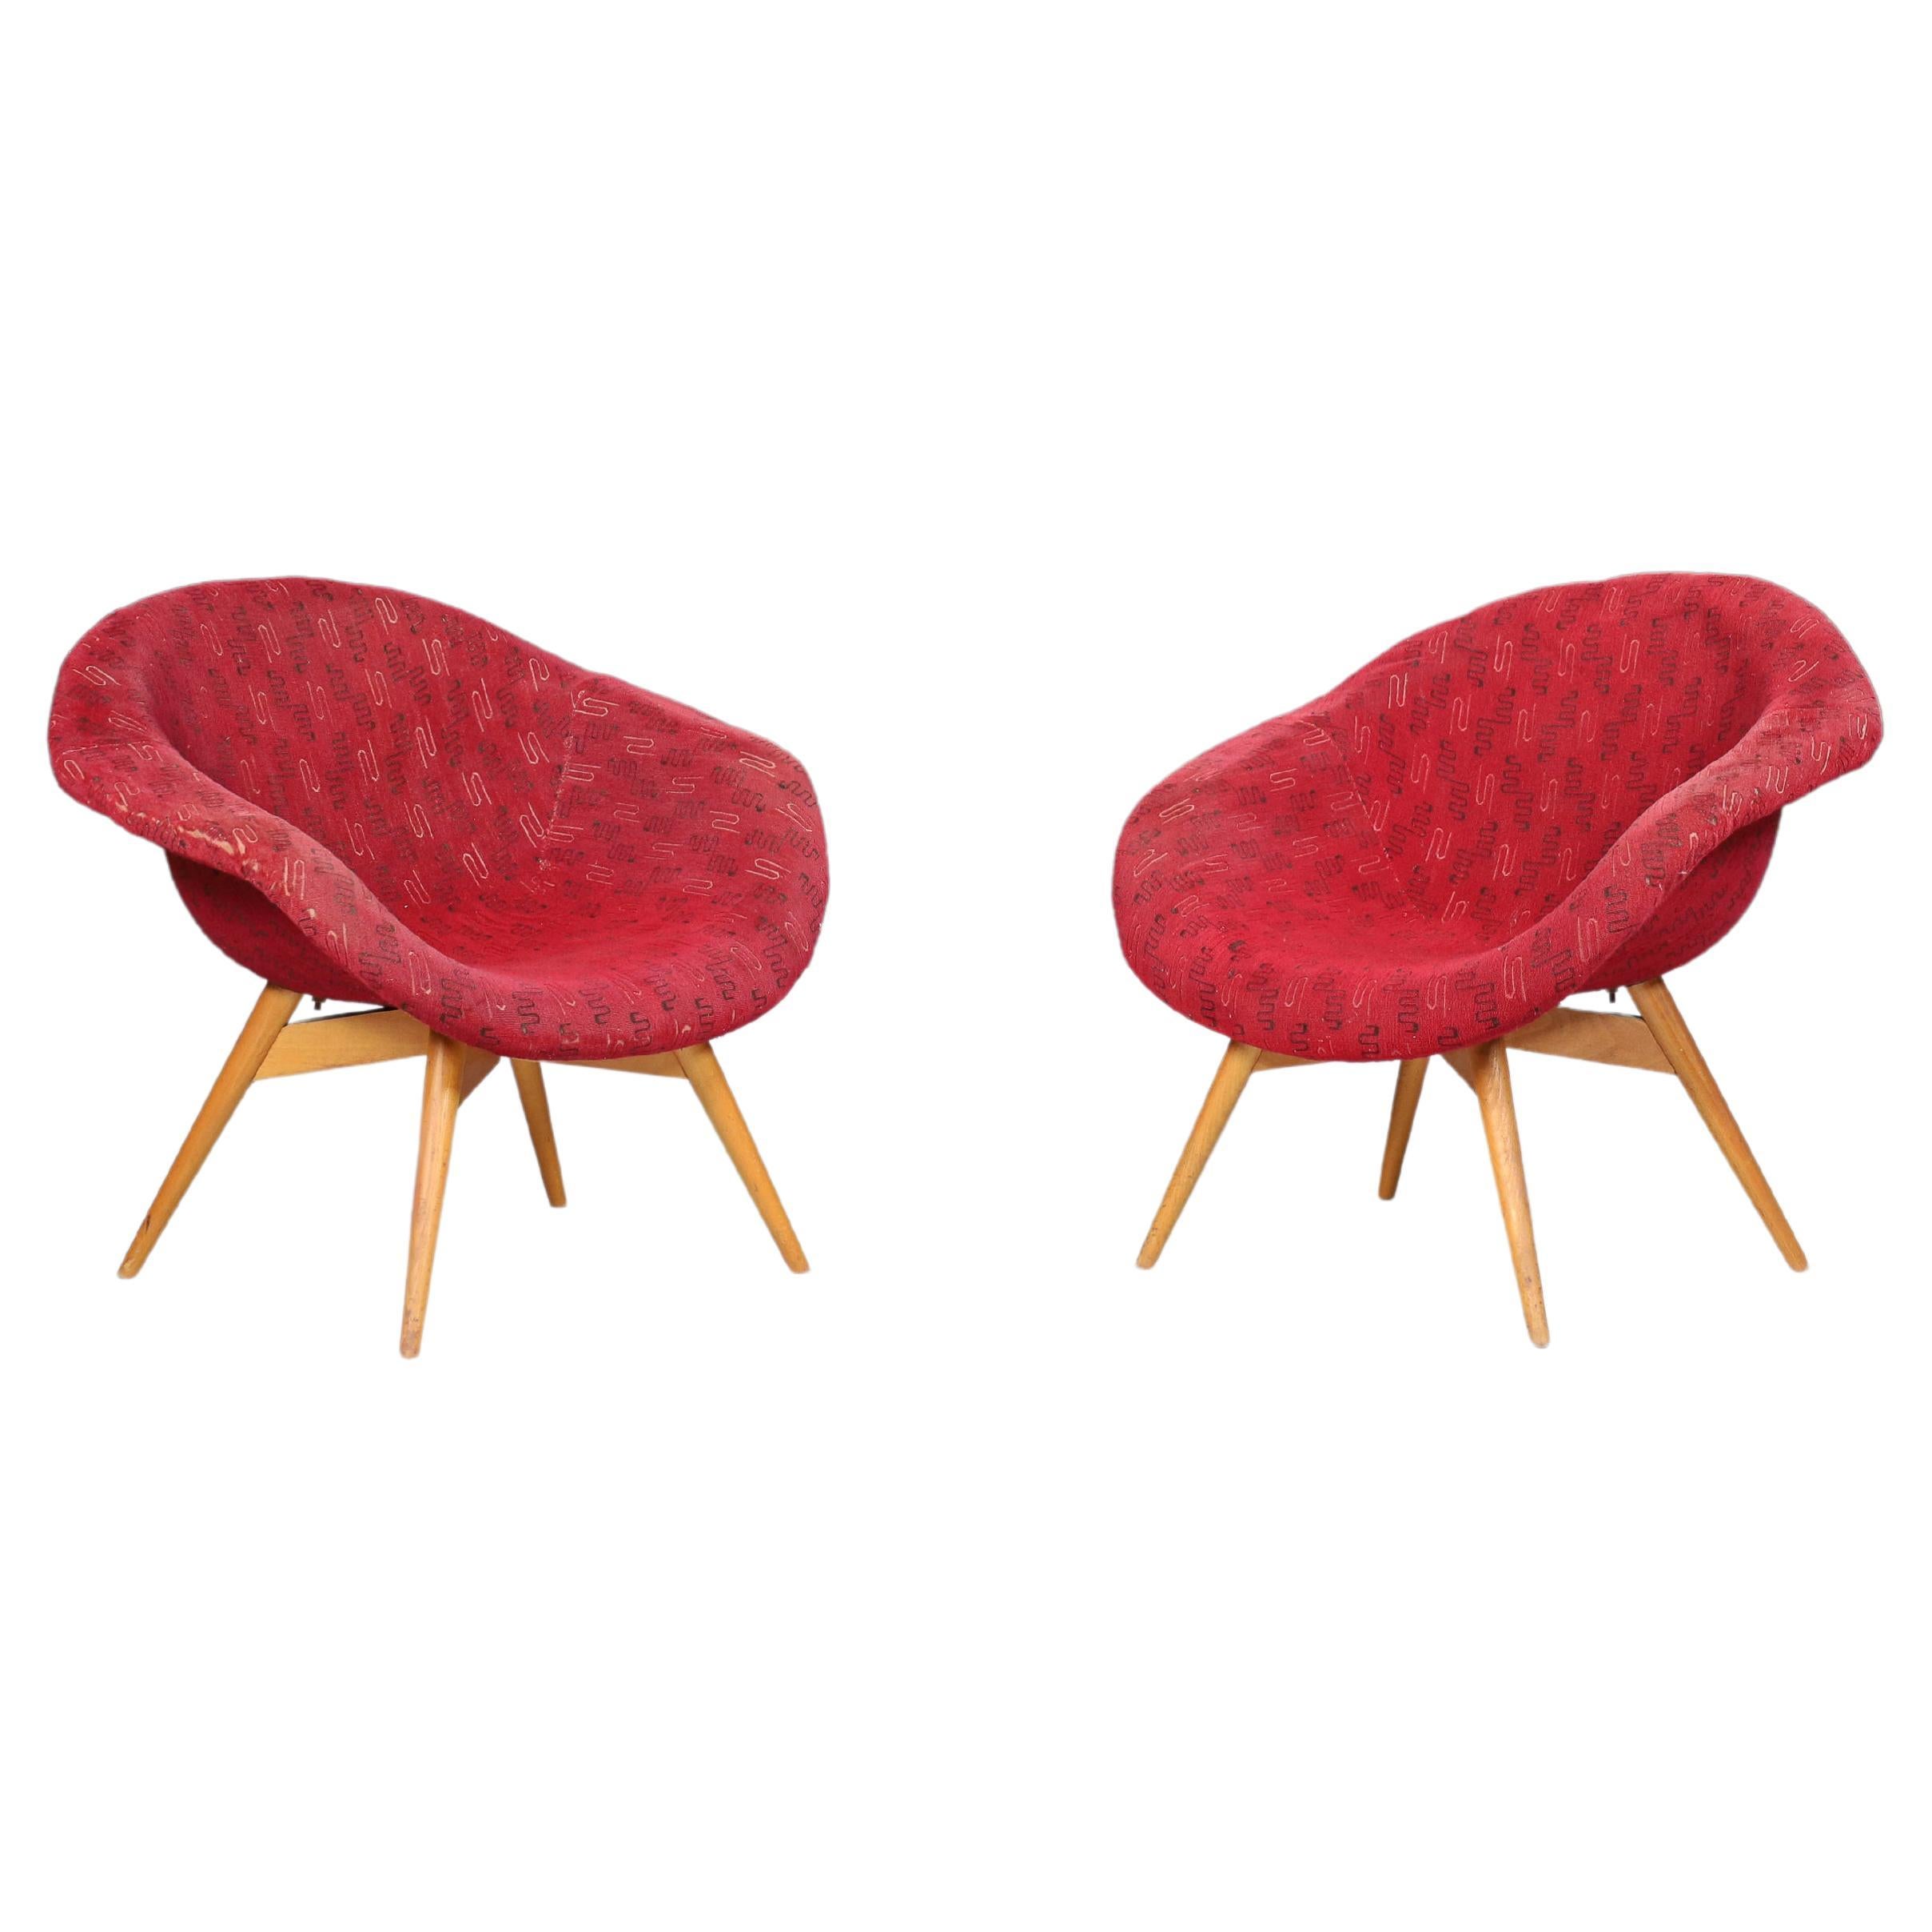 Miroslav Navratil Butterfly Chairs in Original Red Fabric, 1960 For Sale